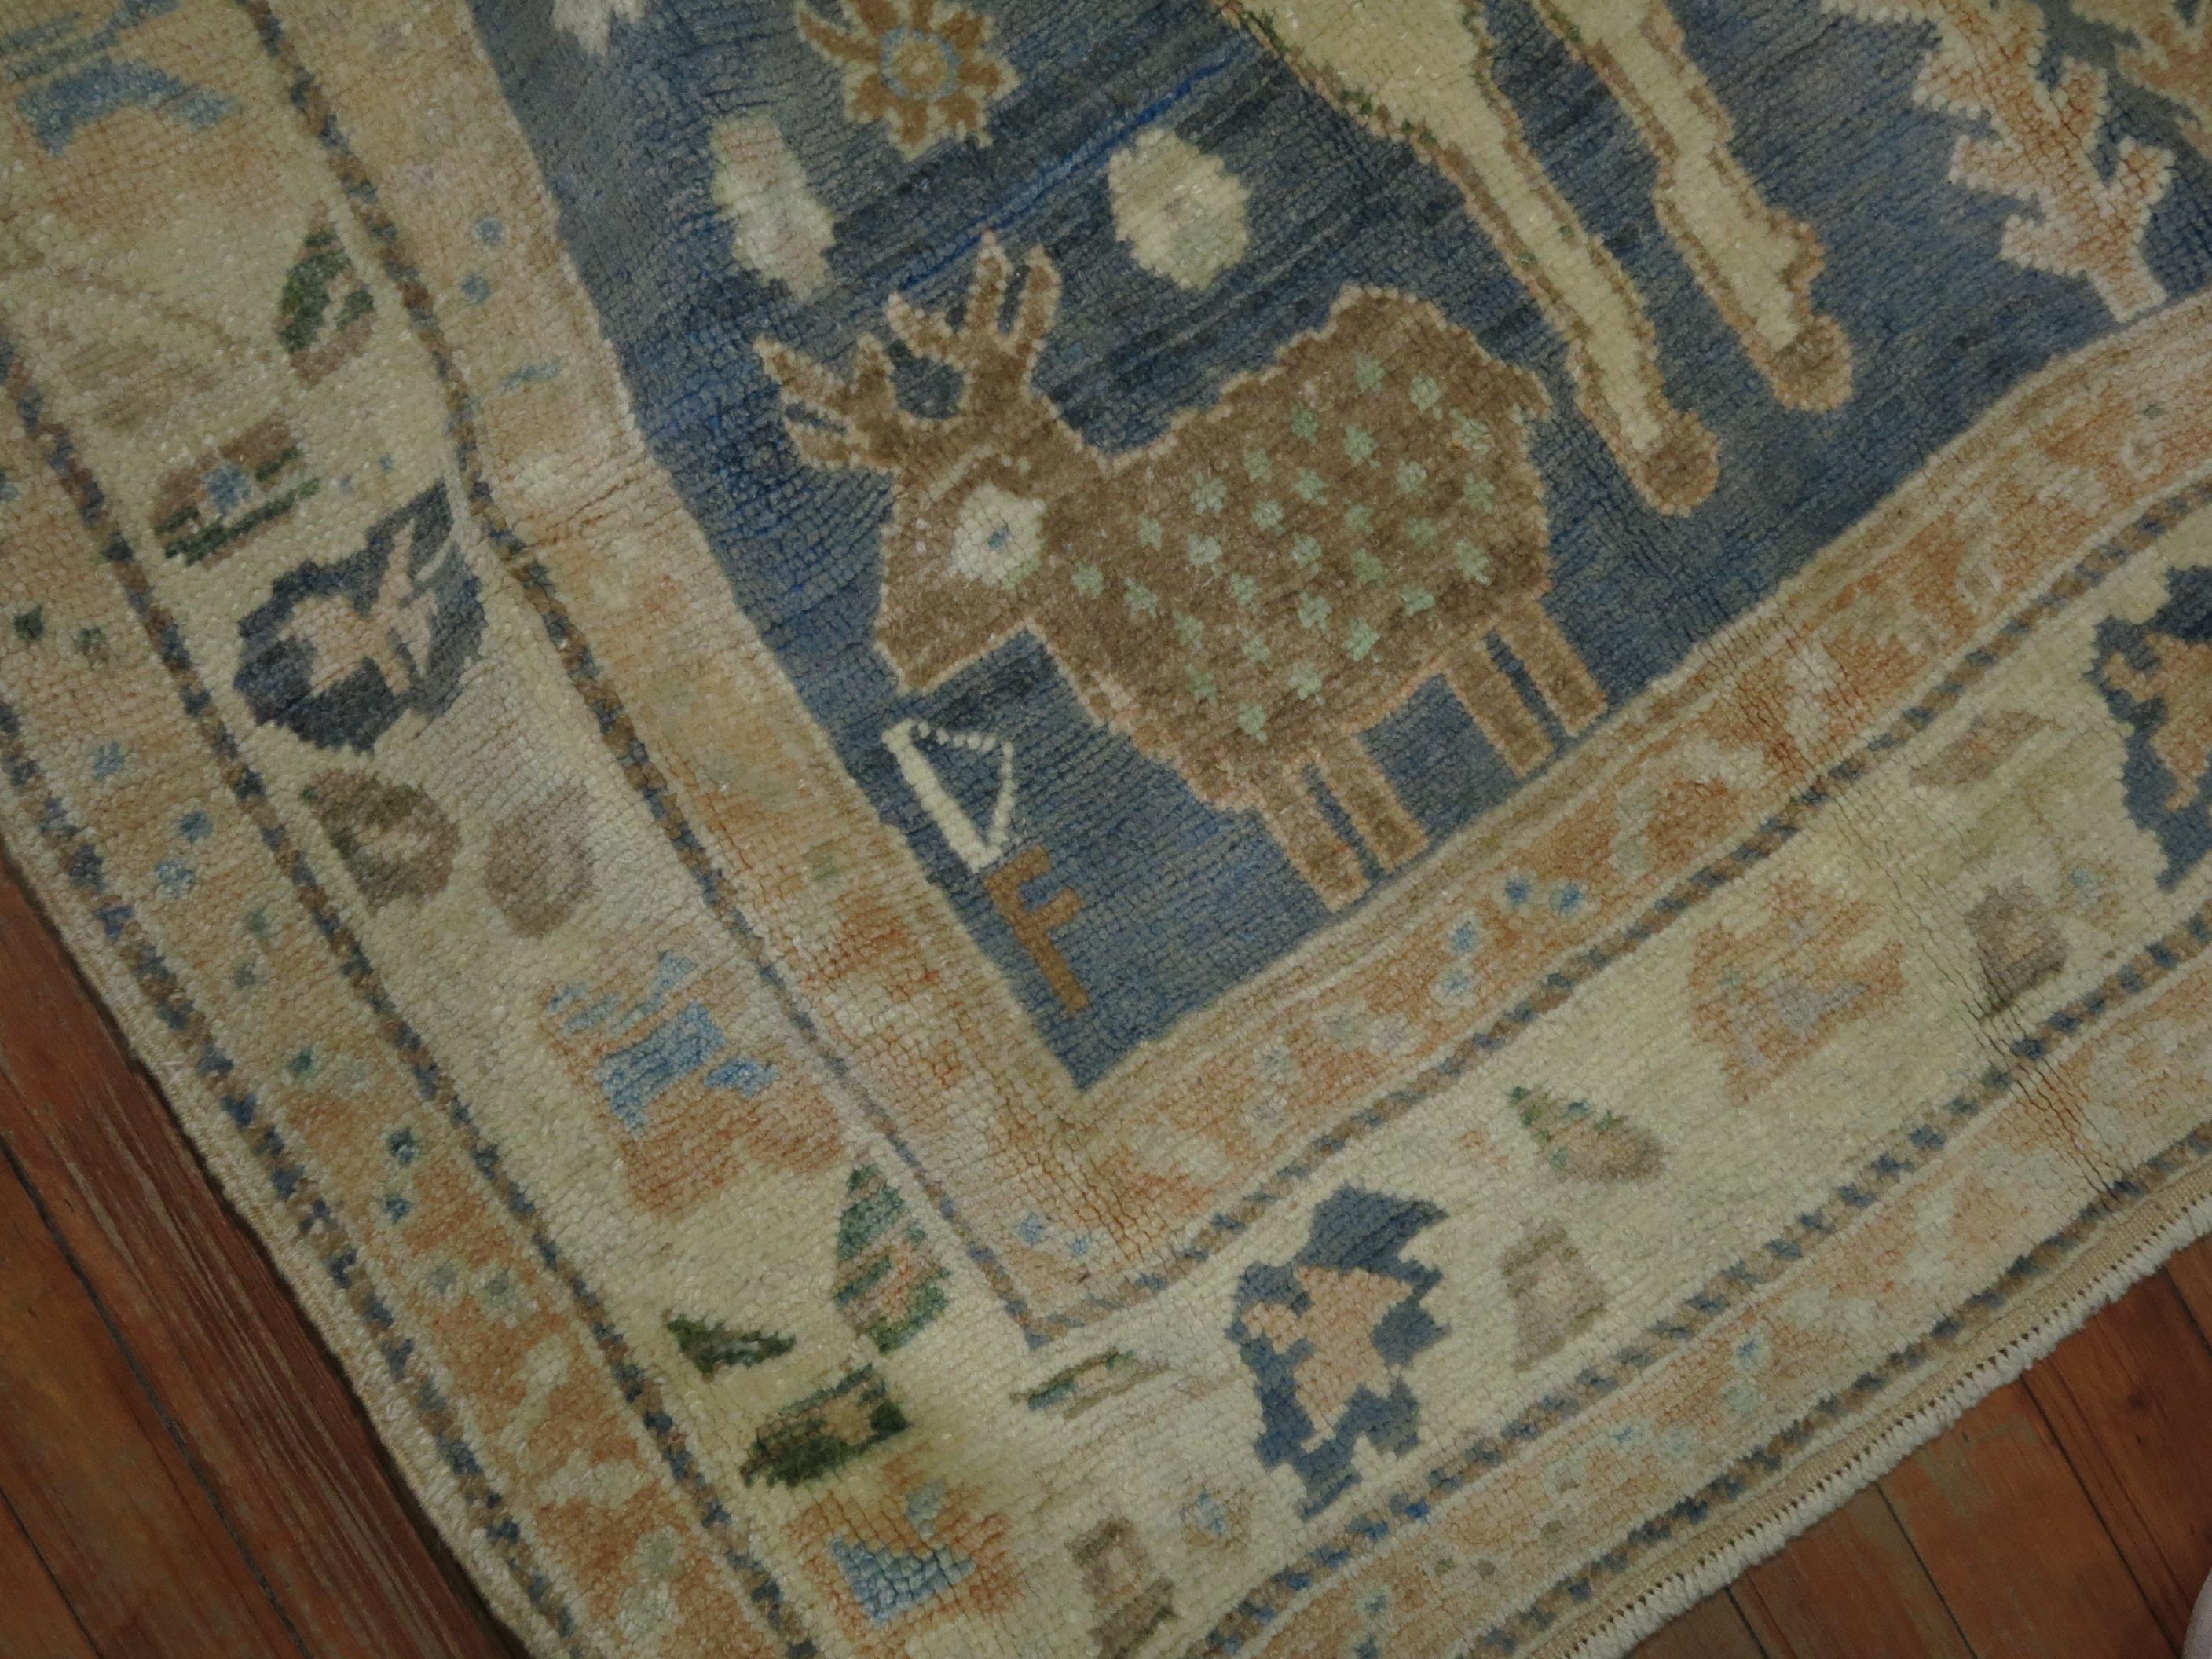 A highly decorative mid-20th century Turkish rug with 2 large sheep on a casual gray blue sea foam colored ground. Smaller birds and sheep hovering around the field too.

Measures: 4'6'' x 7'2'' circa 1940.